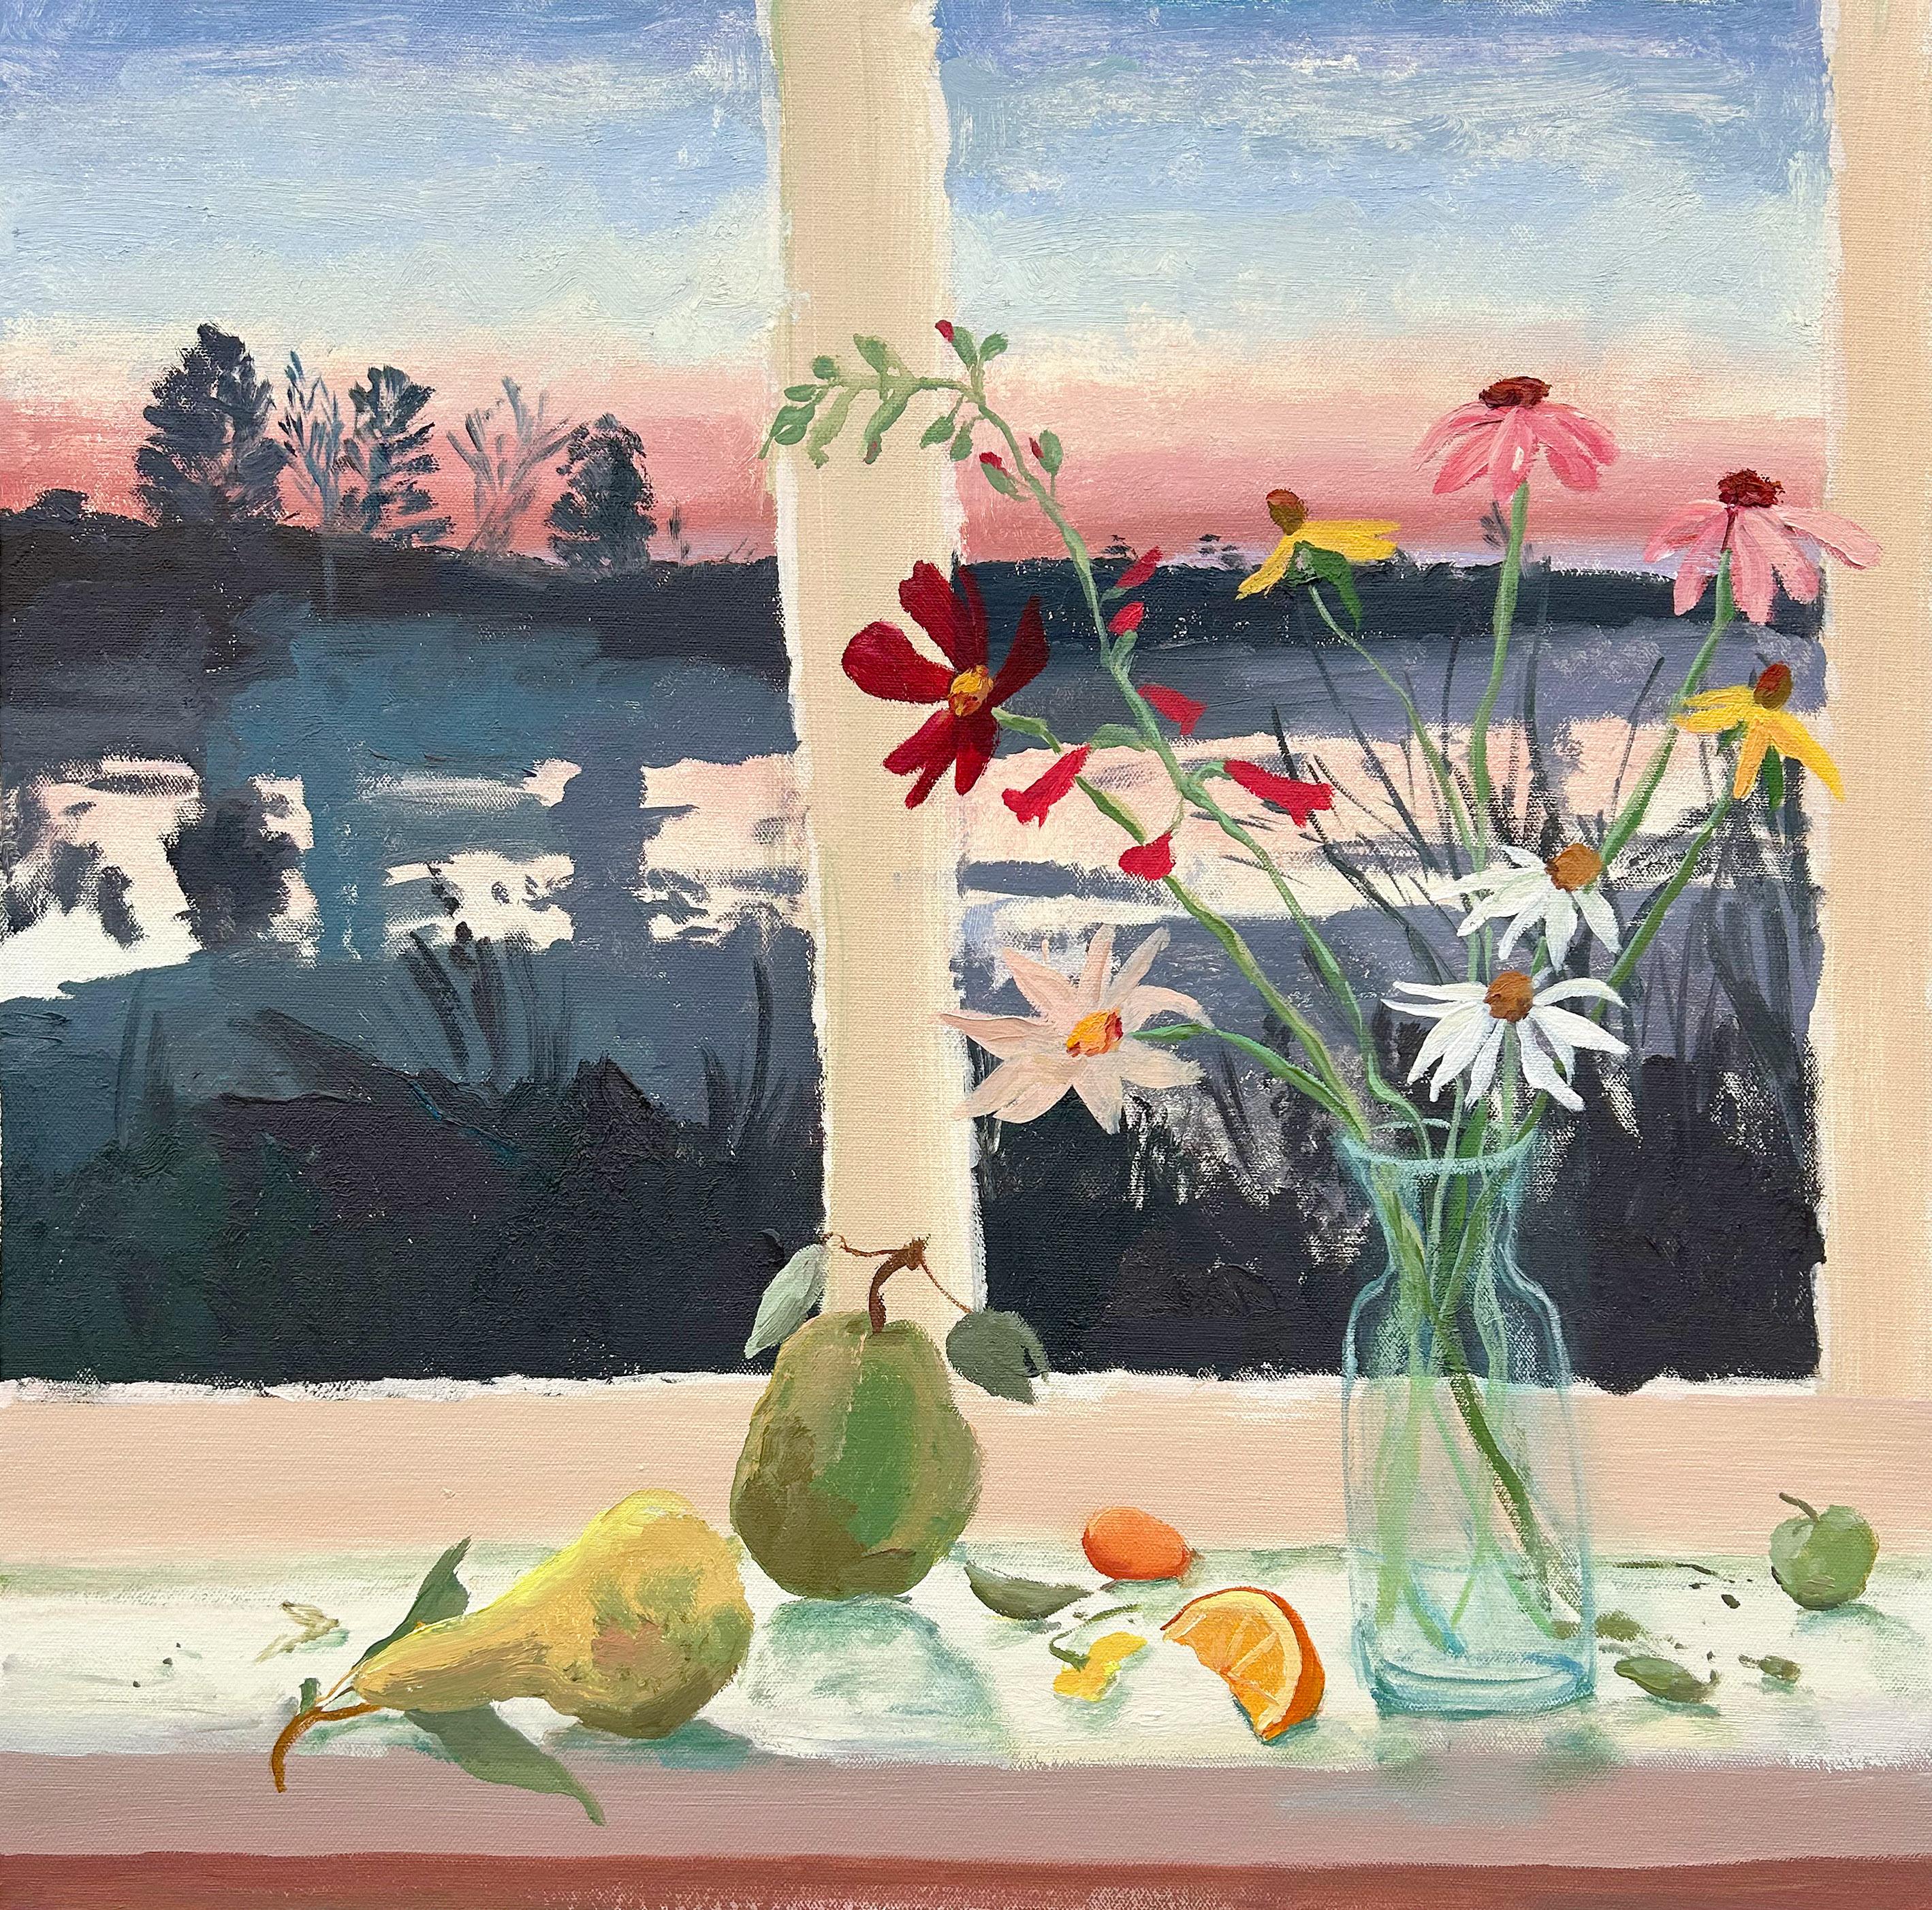 Daisies of the Moon, Yellow, White Flowers, Peach Pink Lake Sunset, Green Pears